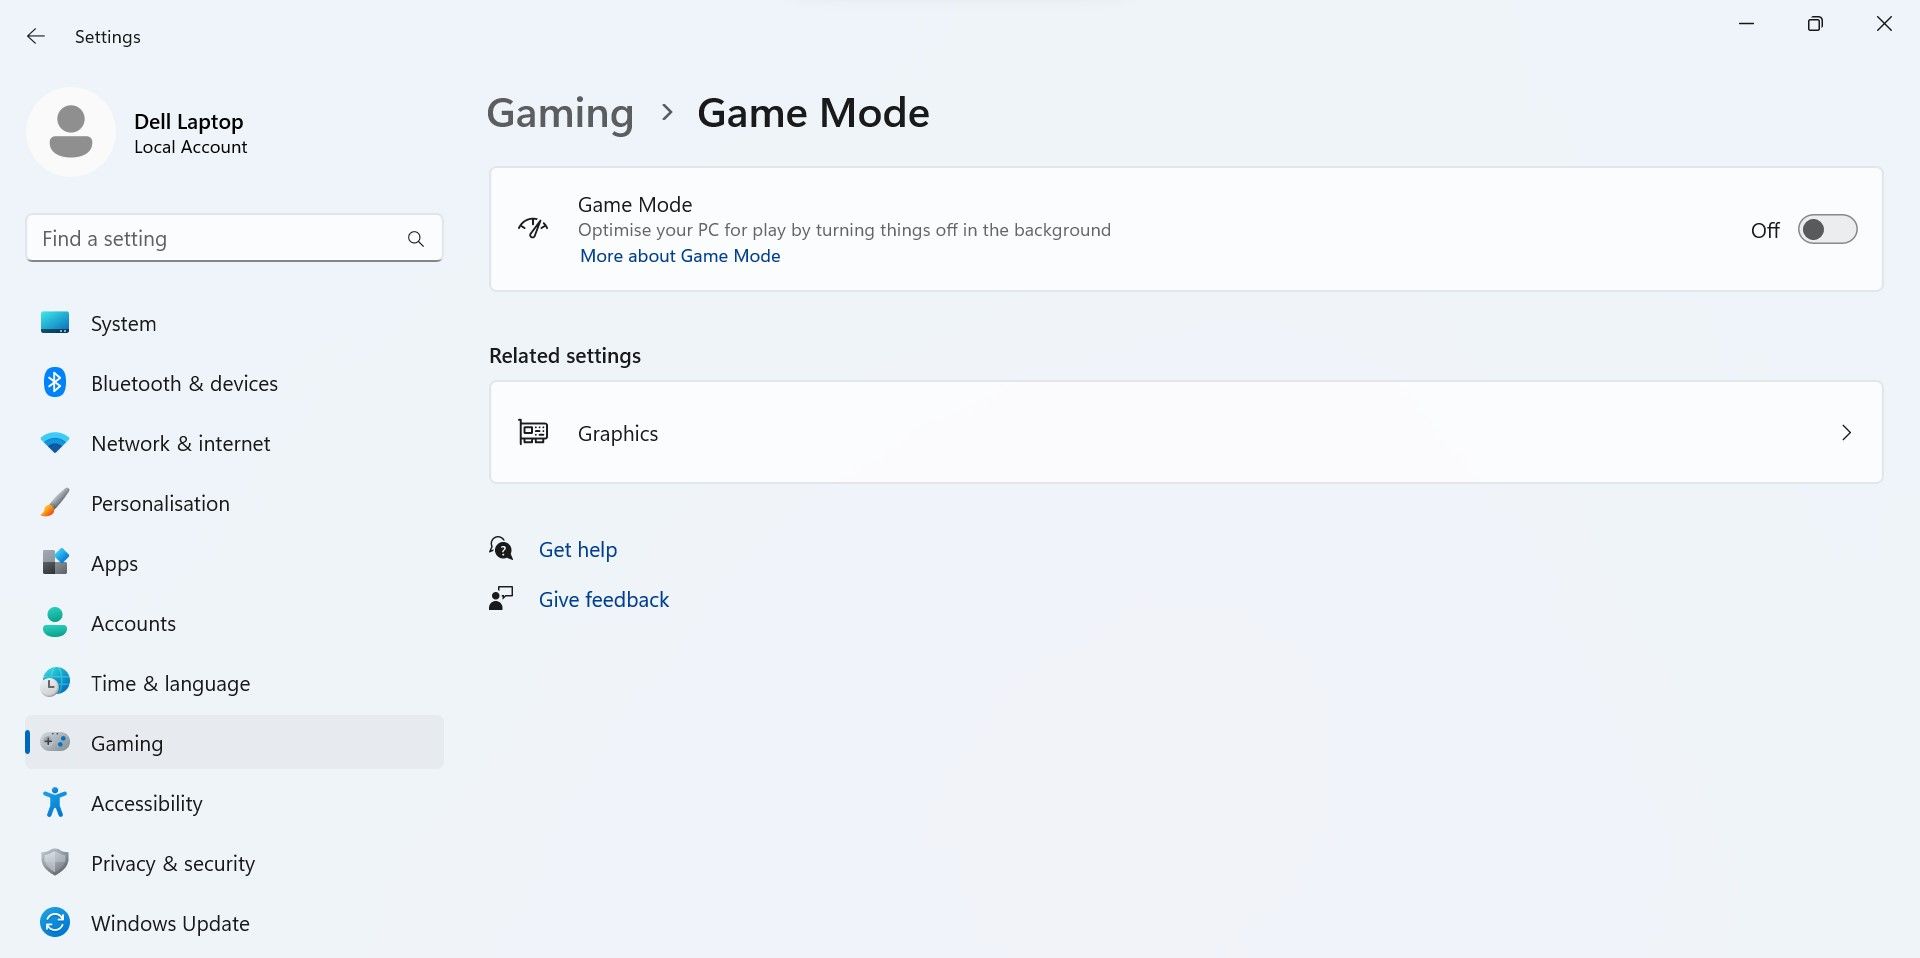 Turn Off the Game Mode From Game Mode Settings in Windows Settings App